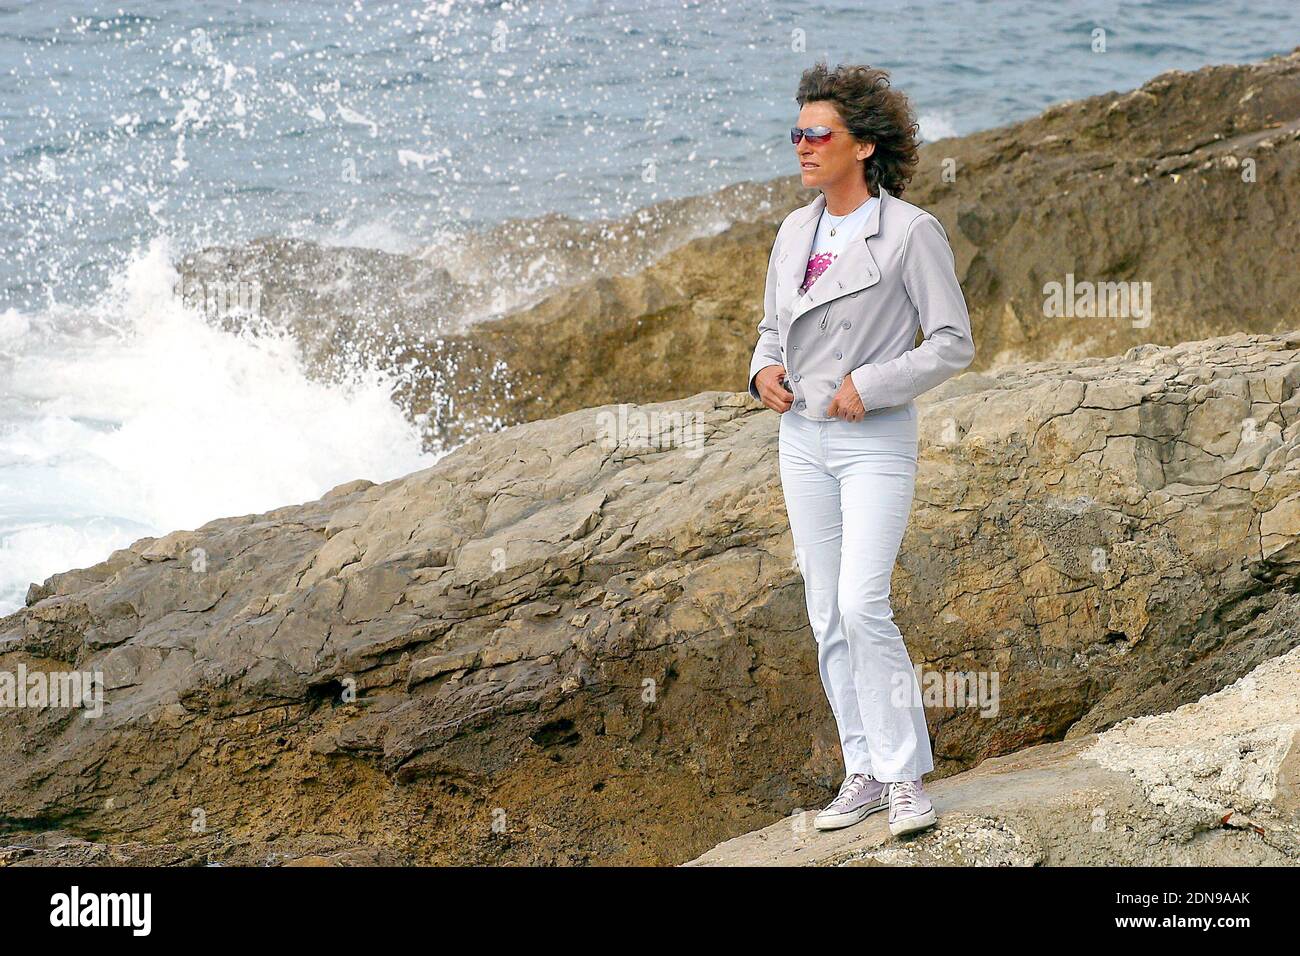 File photo : EXCLUSIVE. French skipper Florence Arthaud poses along the shoreline next to her home in Marseille's district 'La Madrague Montredon', southern France, on May 4, 2005. Eight French nationals and their two Argentine pilots all died when two helicopters collided in La Rioja province in north-west Argentina. Yachtswoman Florence Arthaud, Olympic swimmer Camille Muffat and Olympic boxer Alexis Vastine all died. The helicopters were involved in the filming of TV survival show Dropped. Photo by Gerald Holubowicz/ABACA. Stock Photo